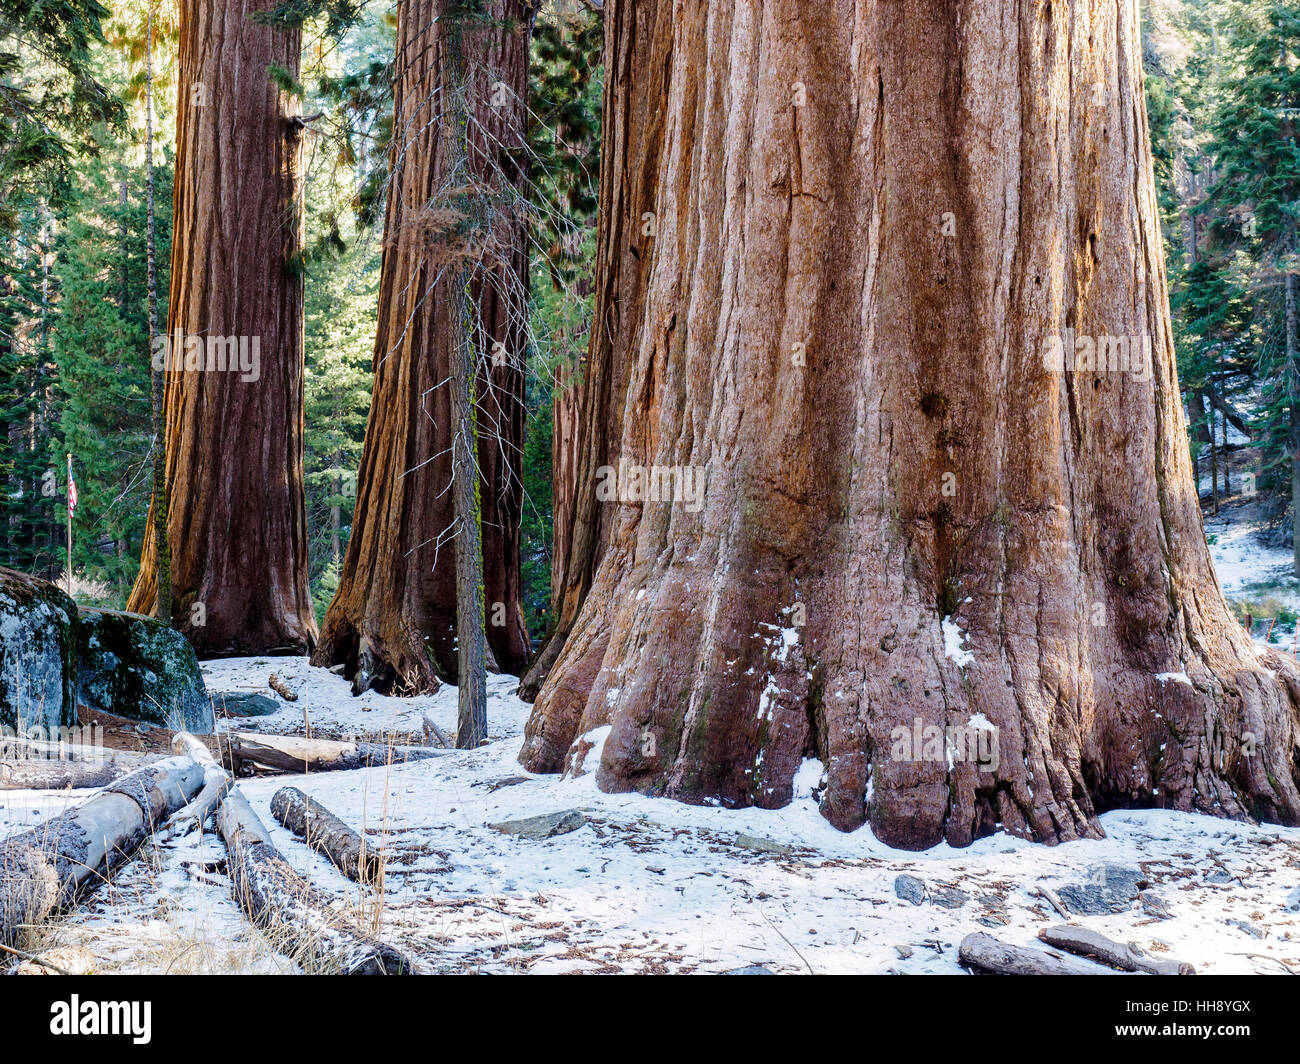 Giant redwood trees near the Giant Forest Museum on the Generals Highway in Sequoia National Park, California. Stock Photo